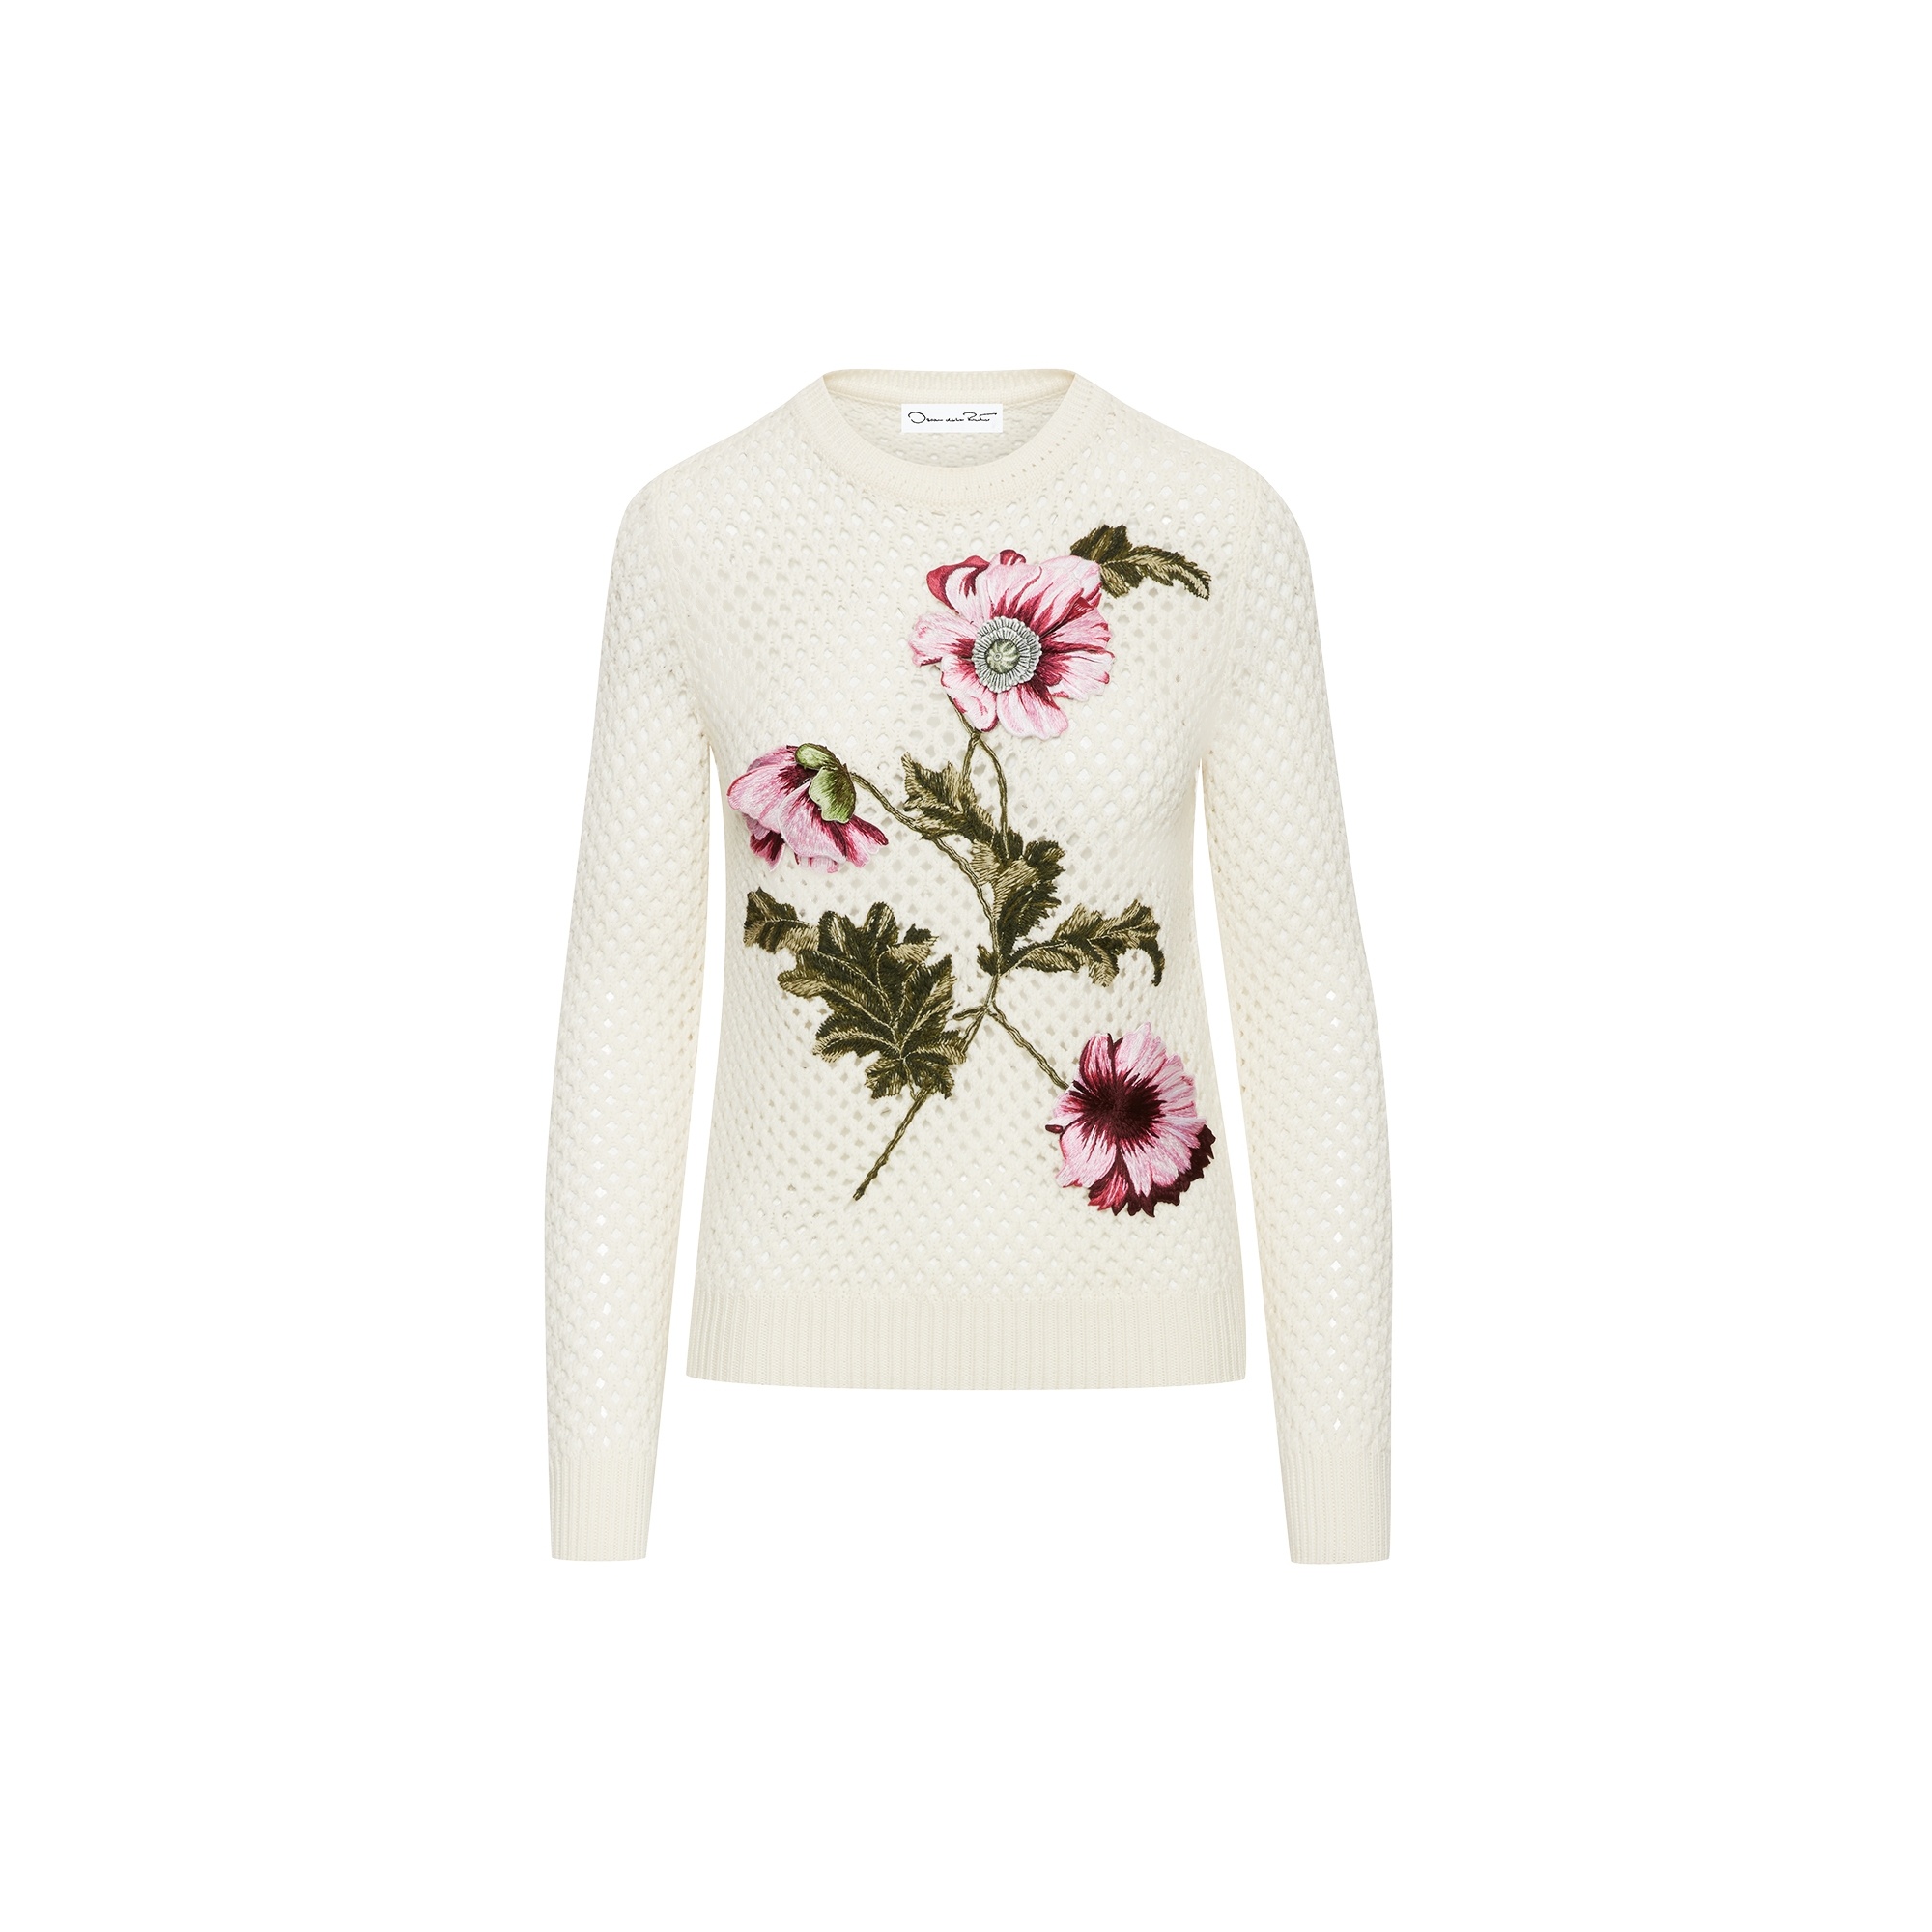 POPPY EMBROIDERED CROCHET PULLOVER - 5